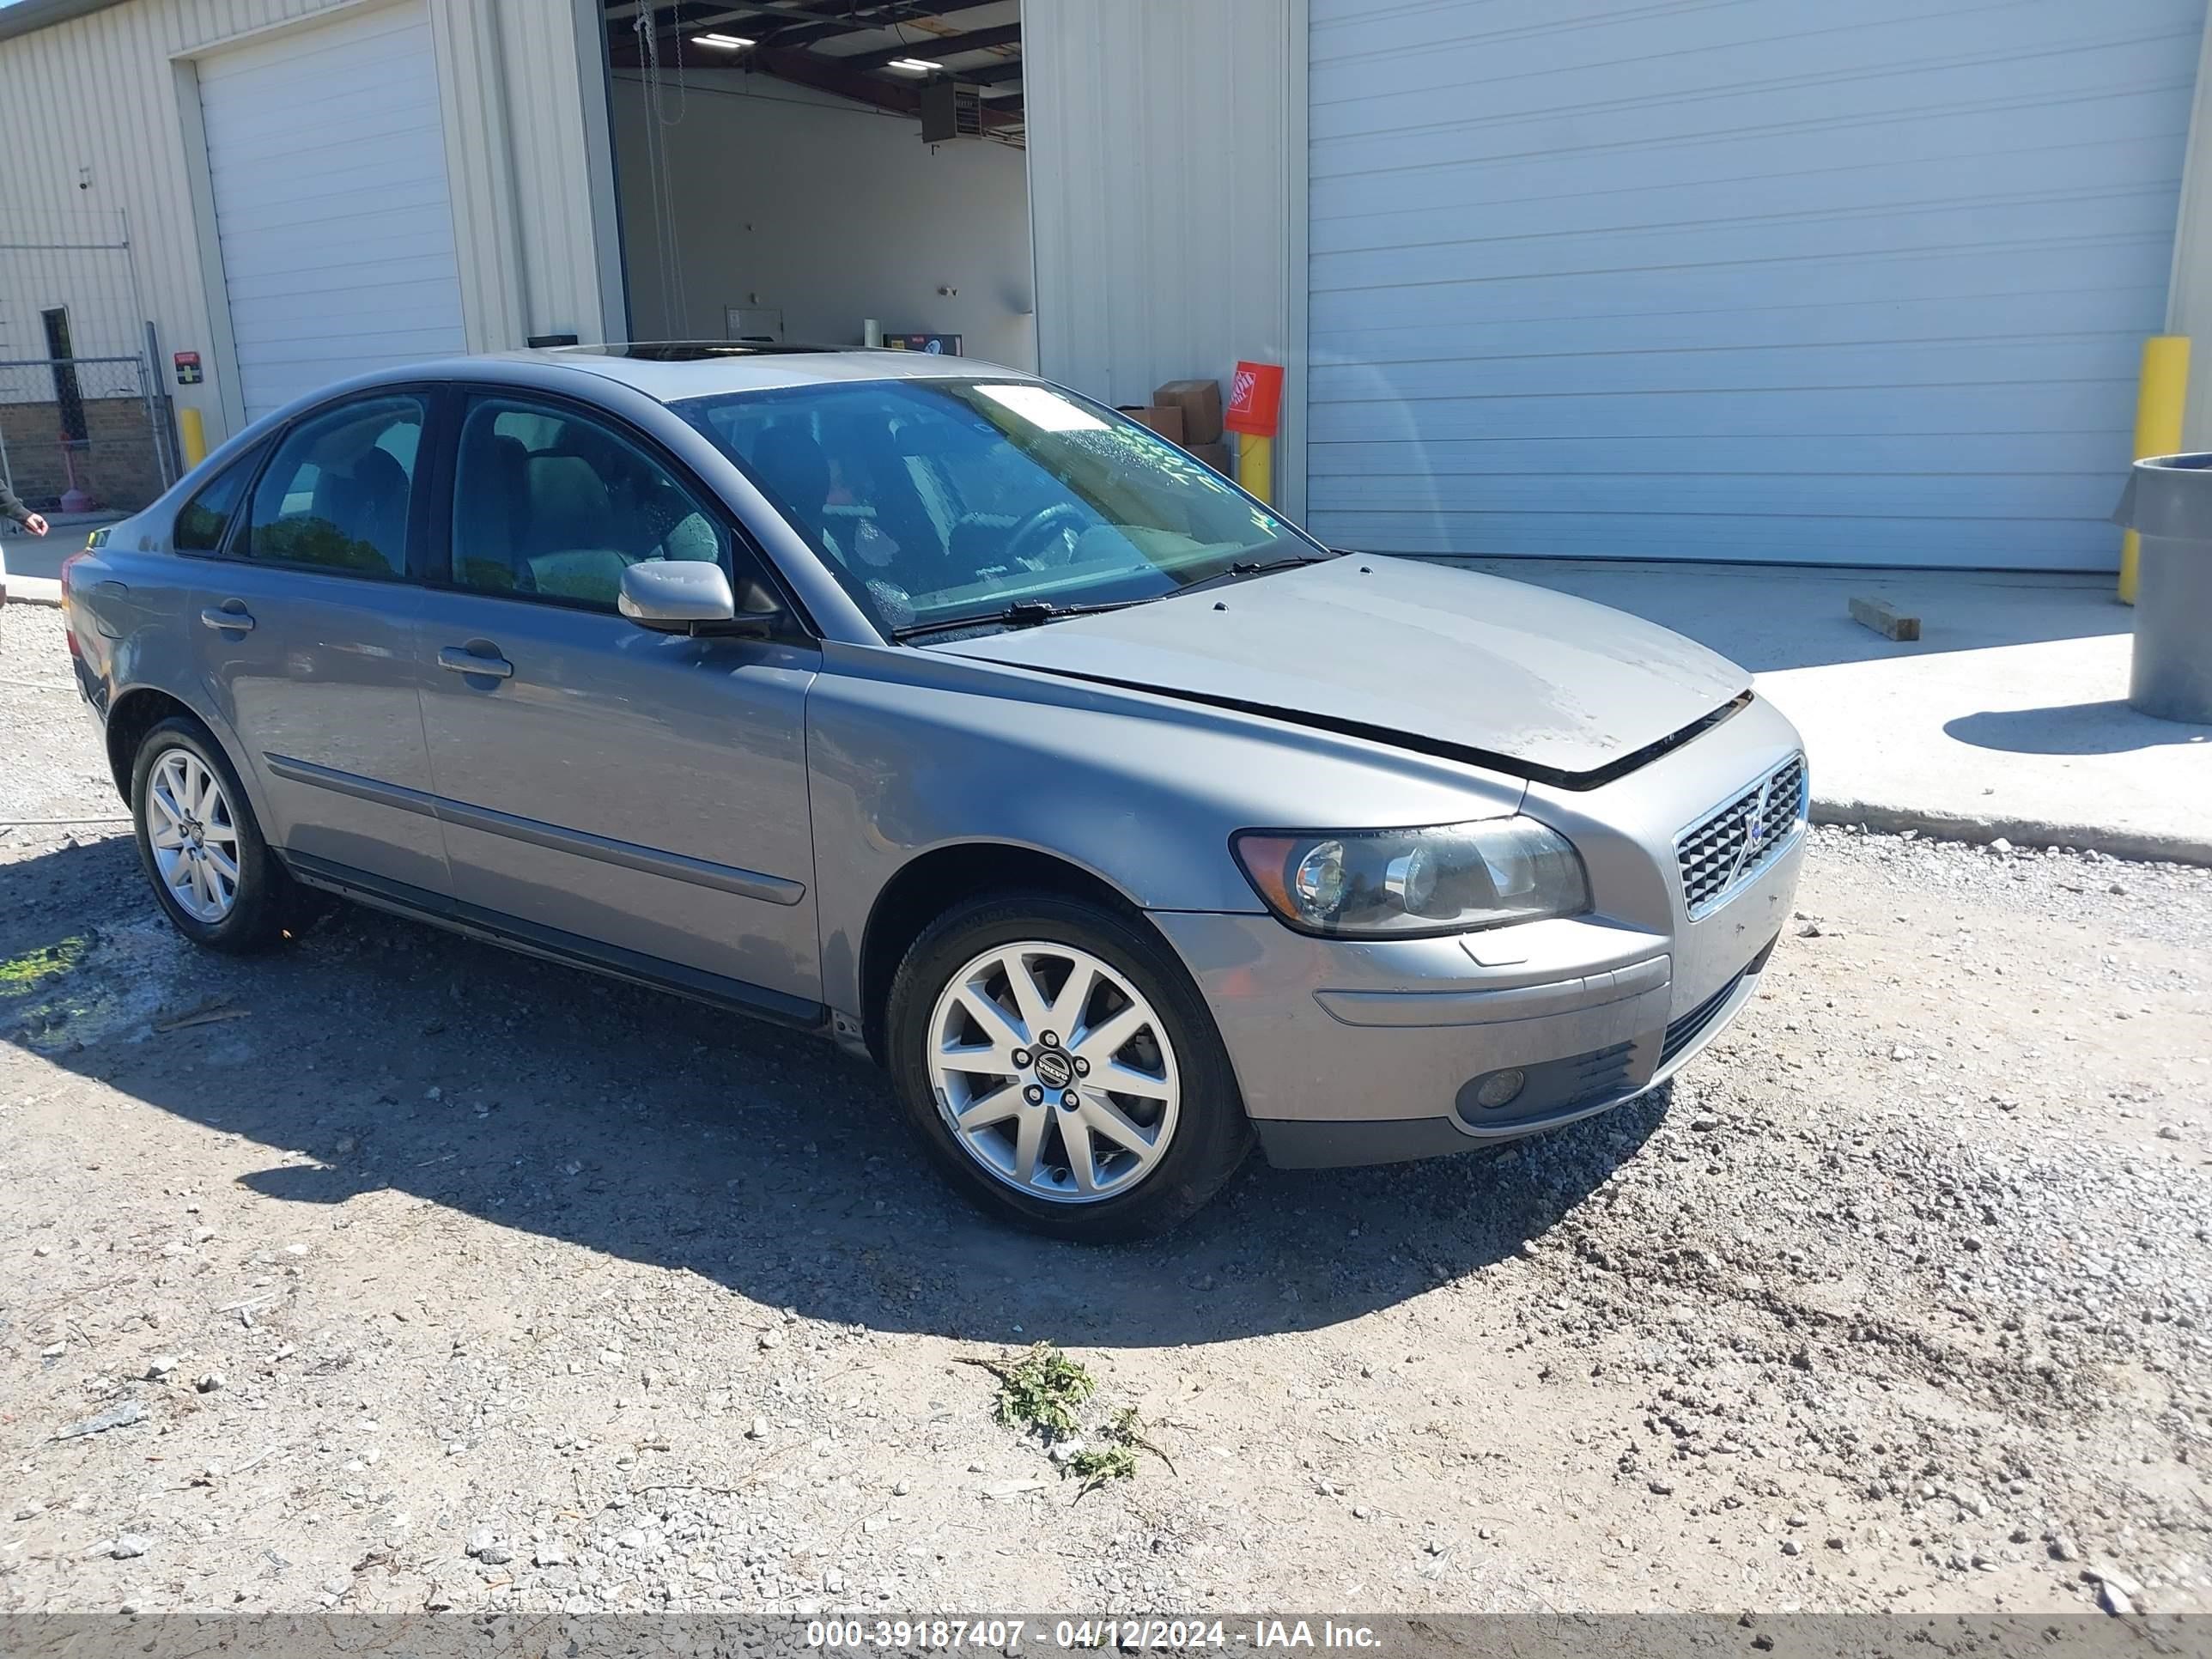 vin: YV1MS682962219373 YV1MS682962219373 2006 volvo s40 2500 for Sale in 35613, 16326 Ennis Road, Athens, Alabama, USA